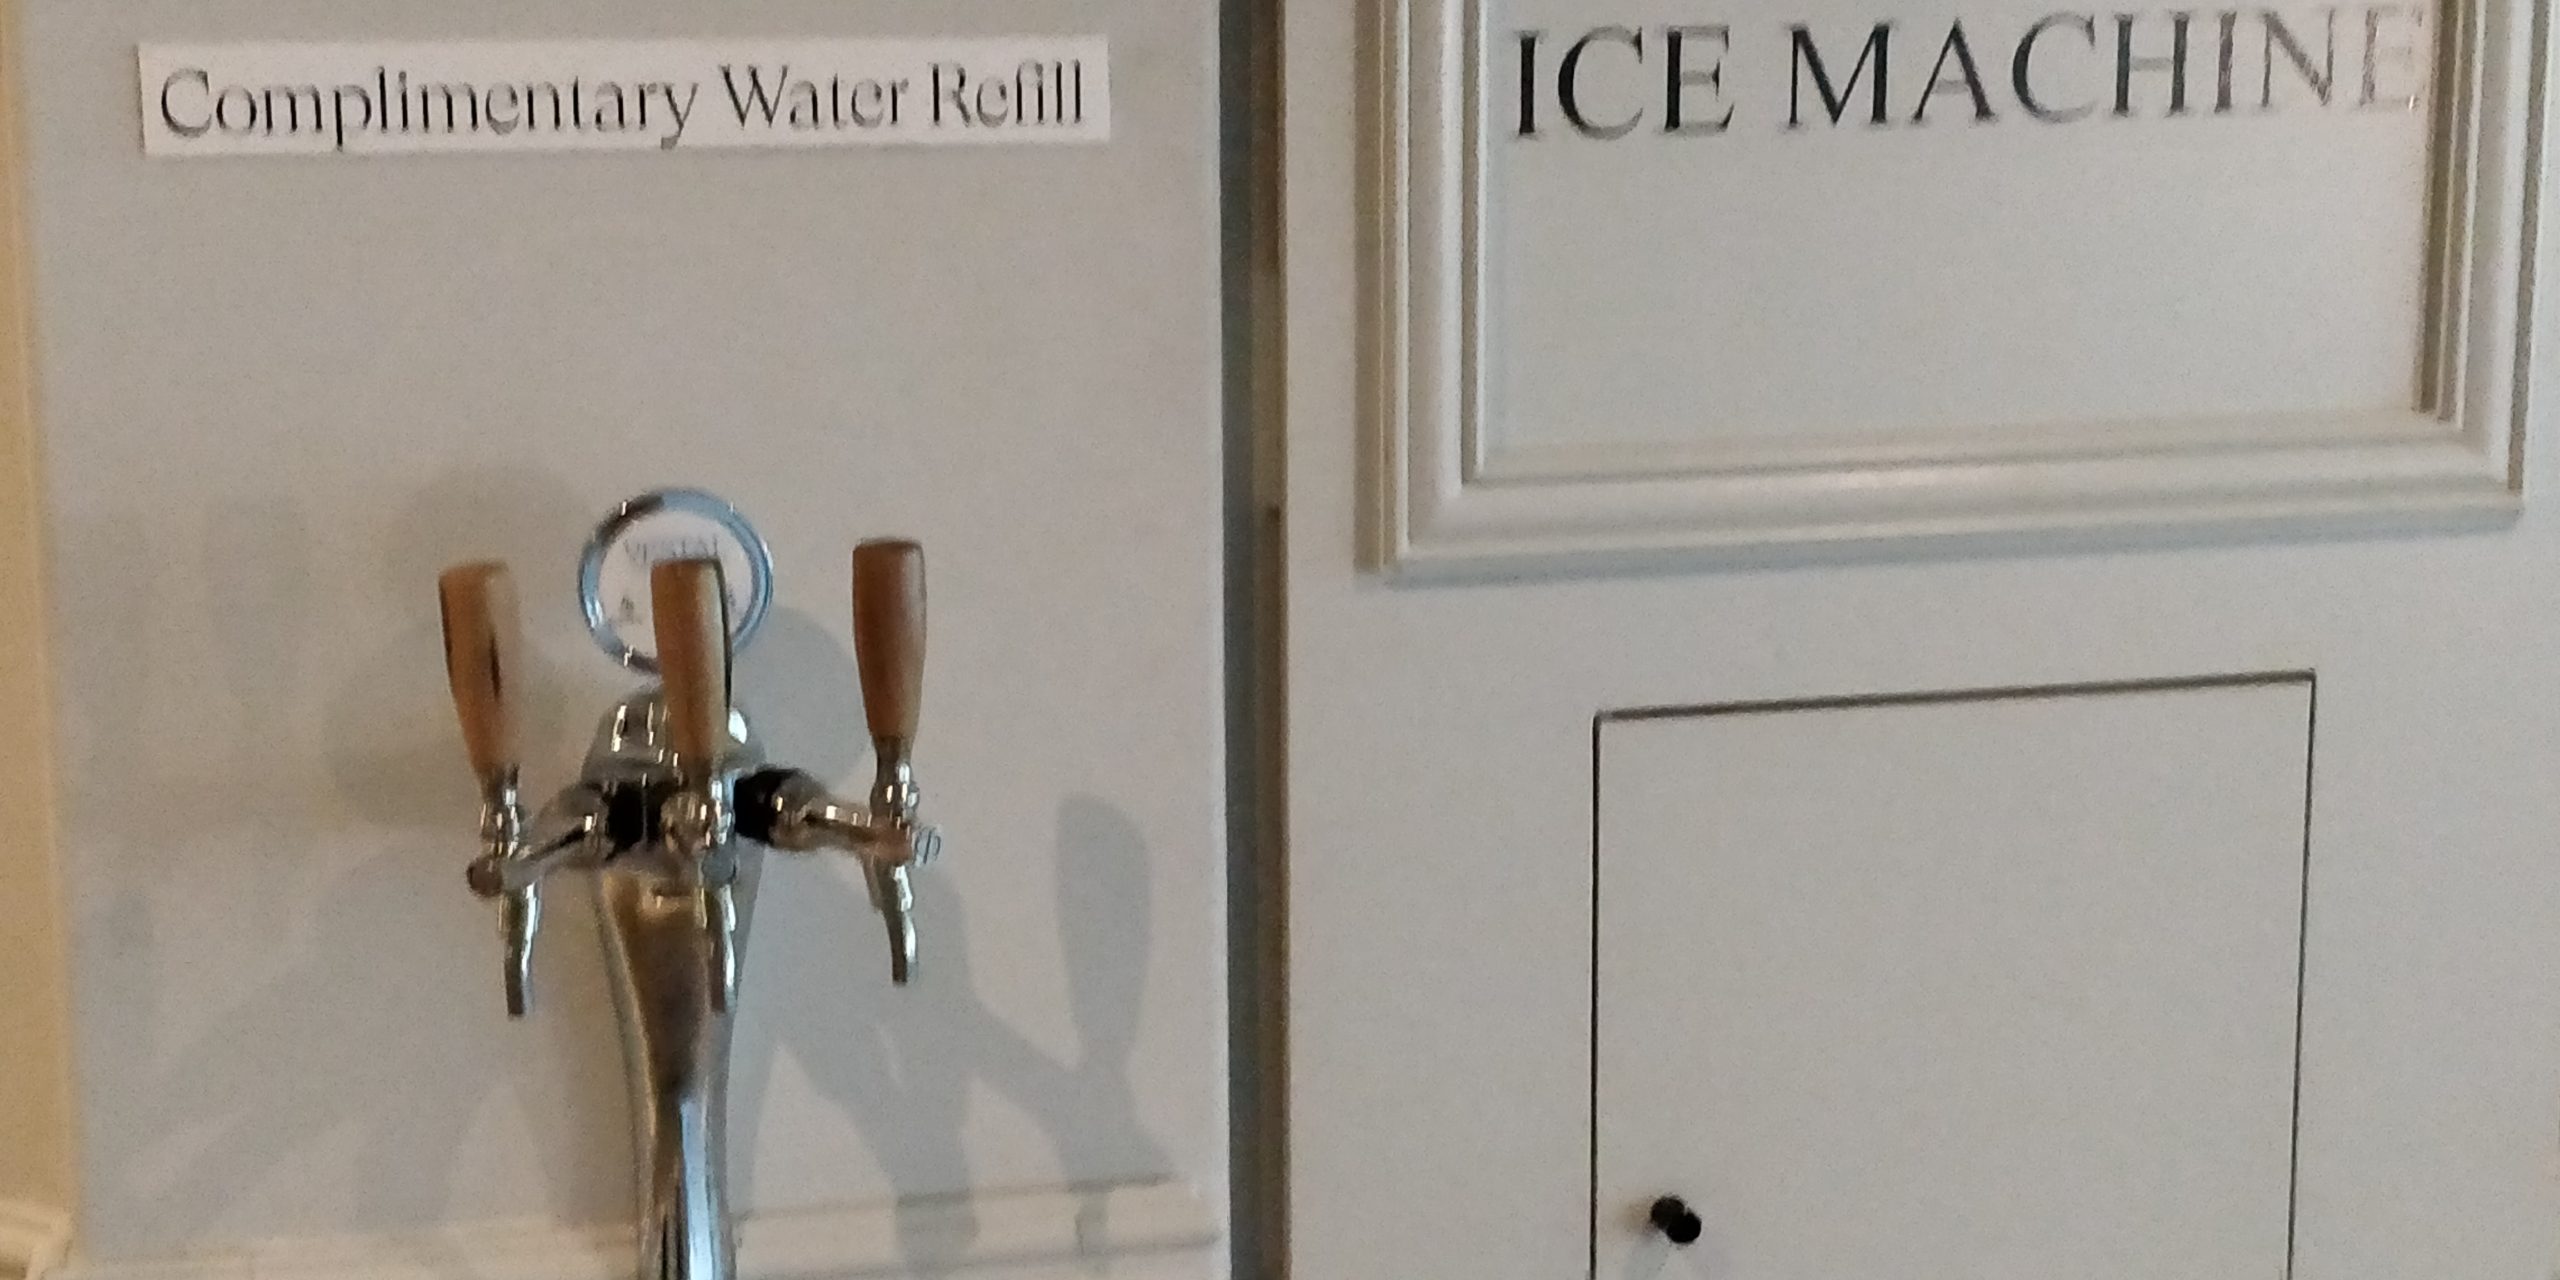 Review the Grand Mirage Resort picture of the water refill station located on each floor